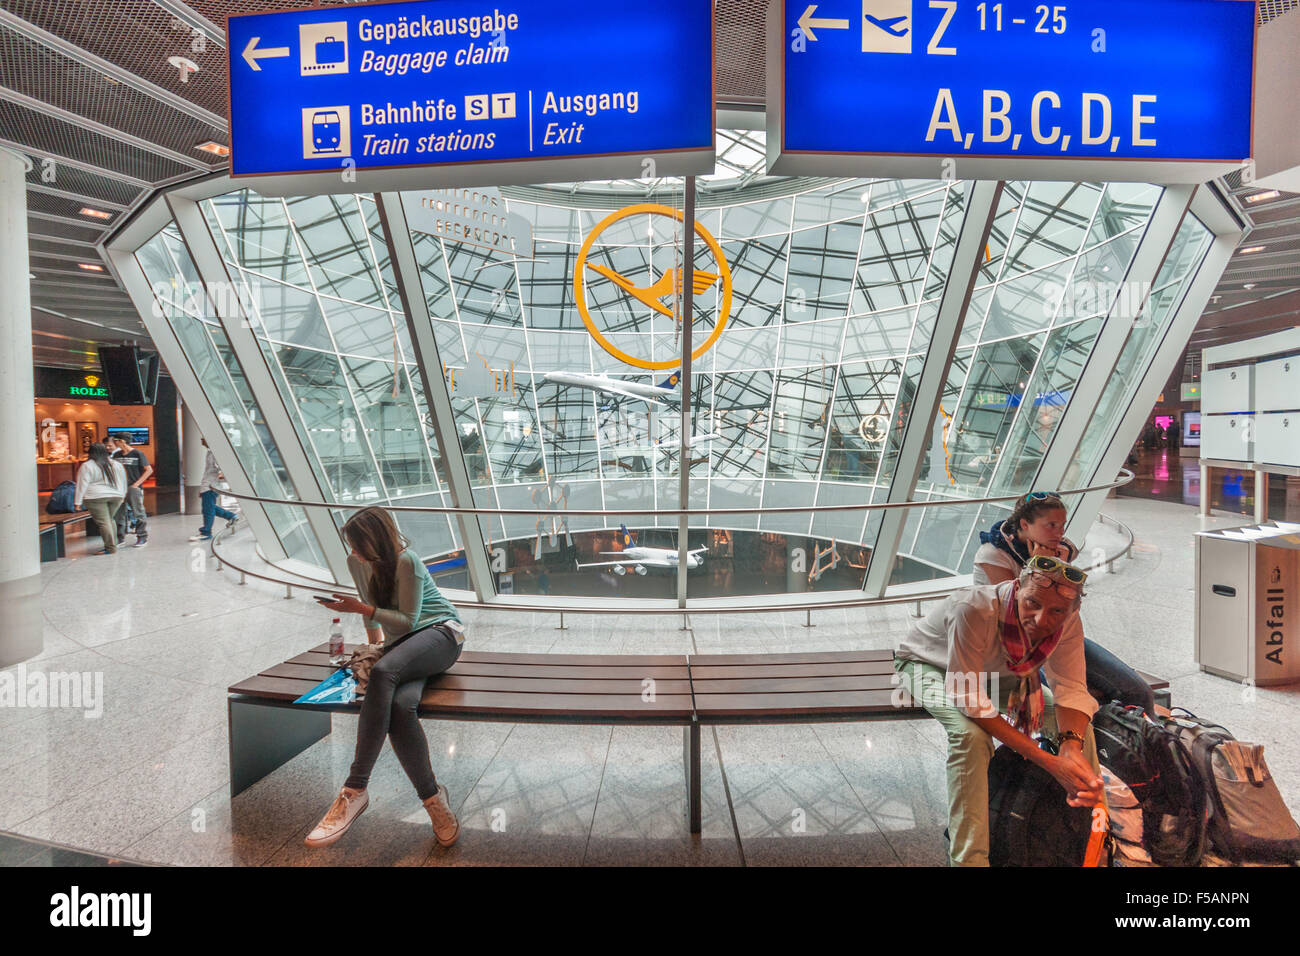 Frankfurt, Germany. People waiting in the Airport. Large 'Lufthansa' logo in the background. Stock Photo